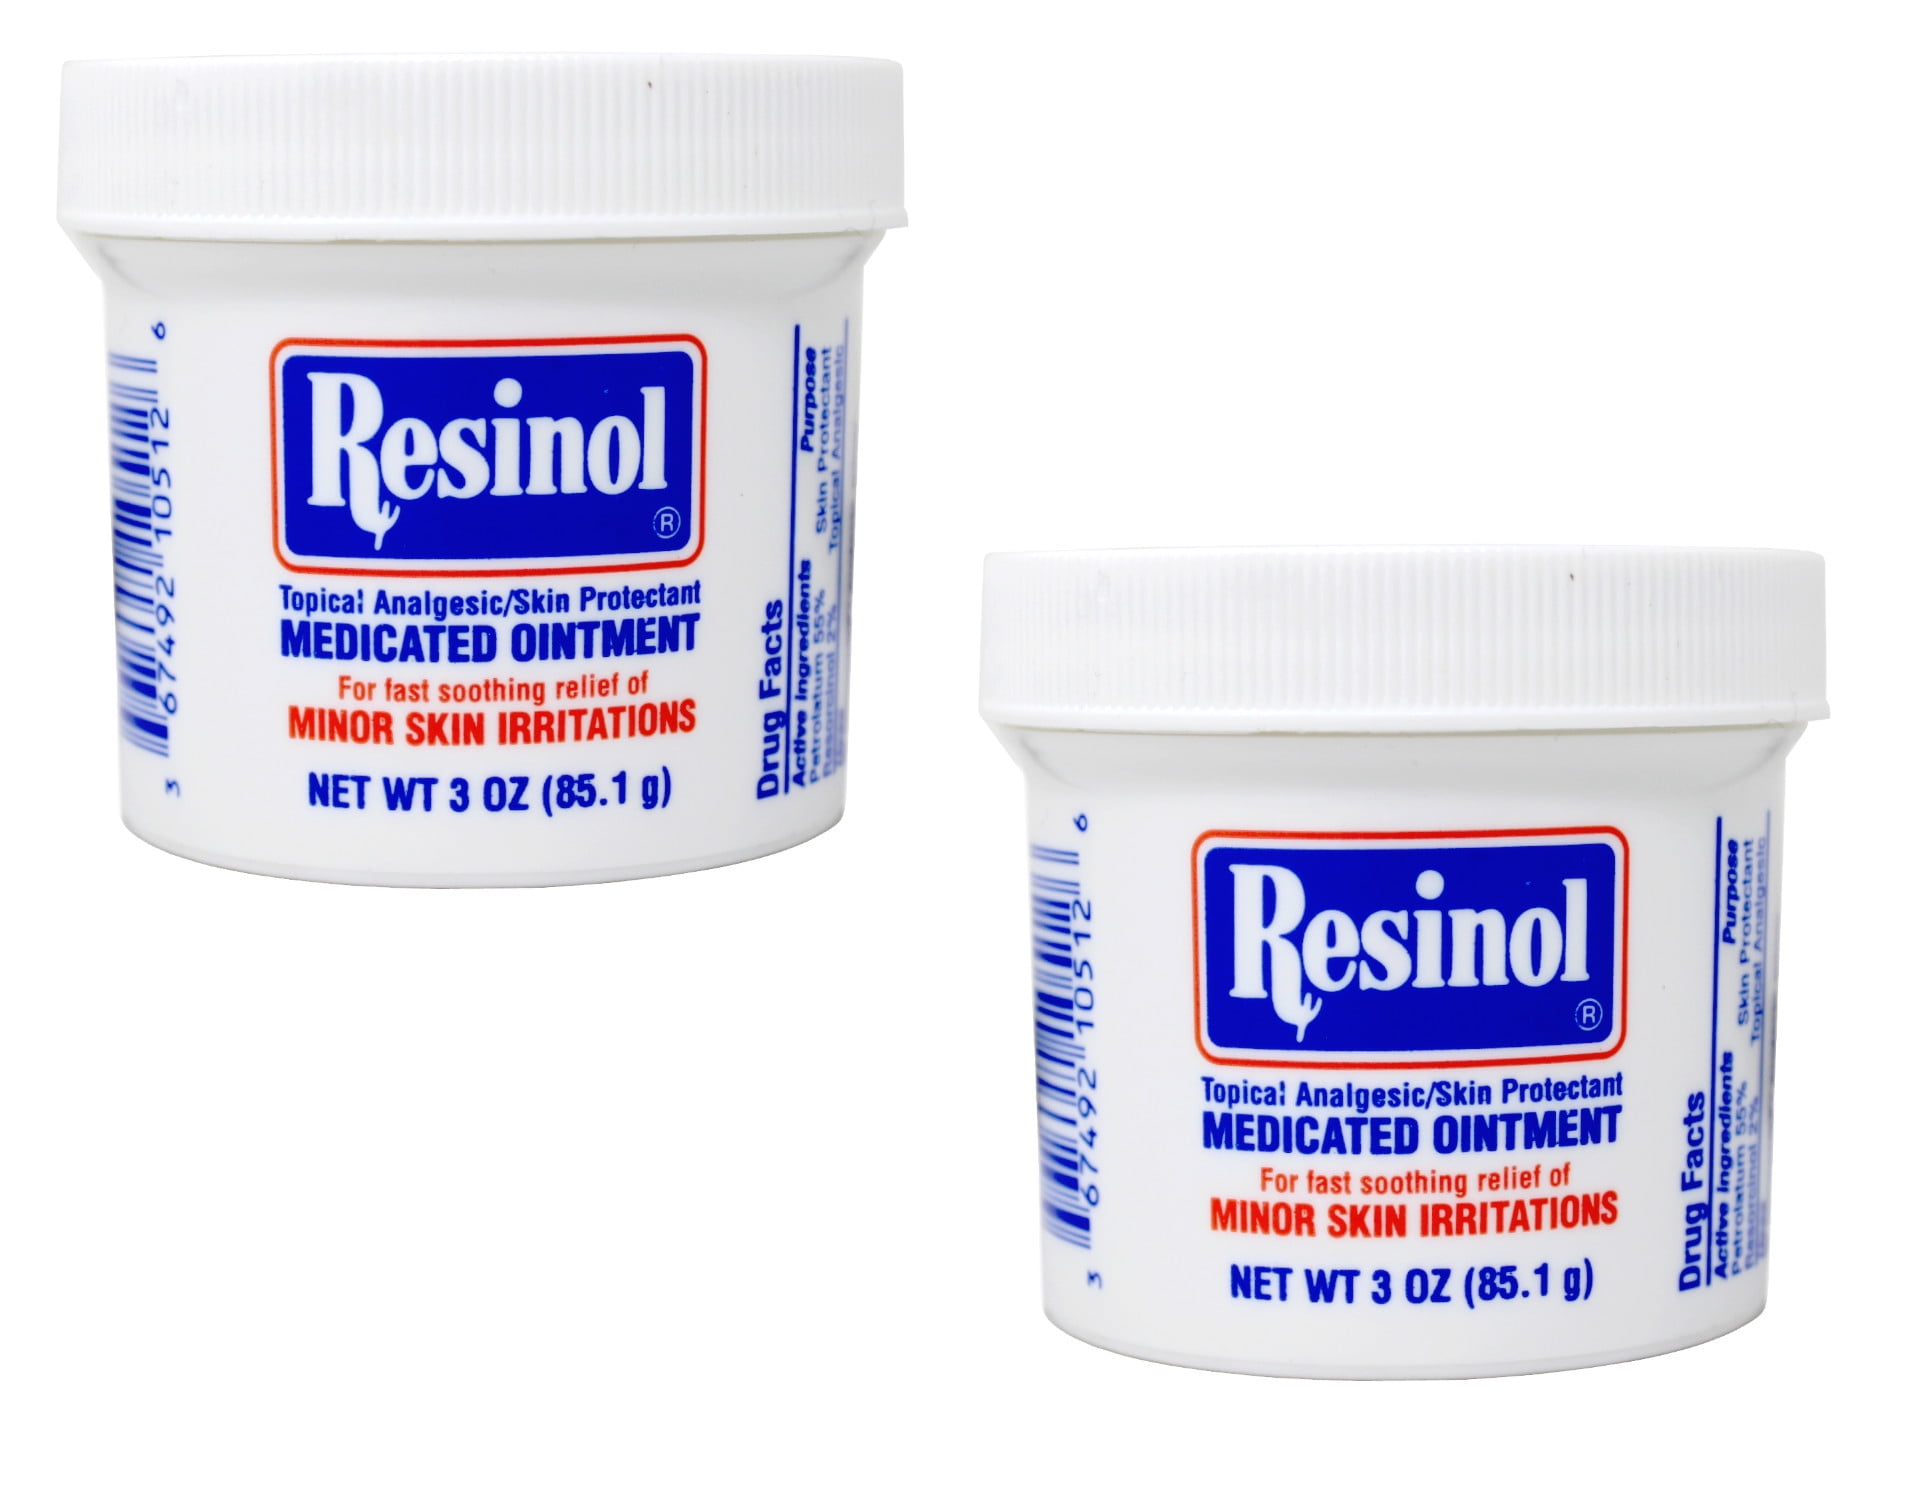 Resinol Medicated Ointment,Relief Of Minor Skin Irritations,2 PACK, 1.25 oz  each